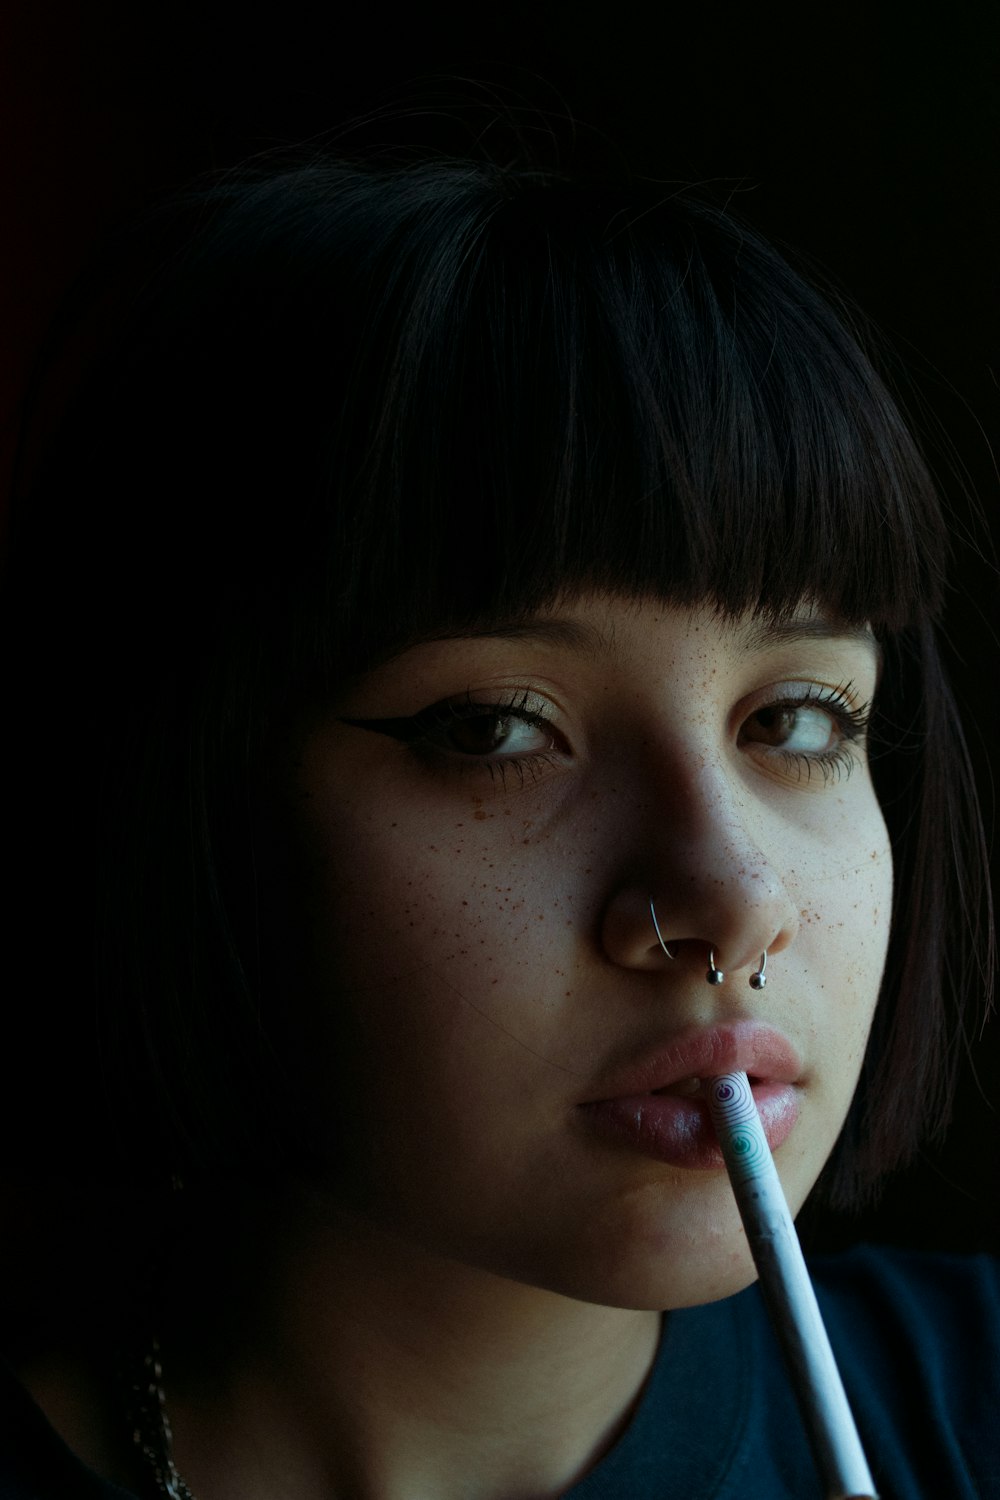 woman with white cigarette stick on her mouth